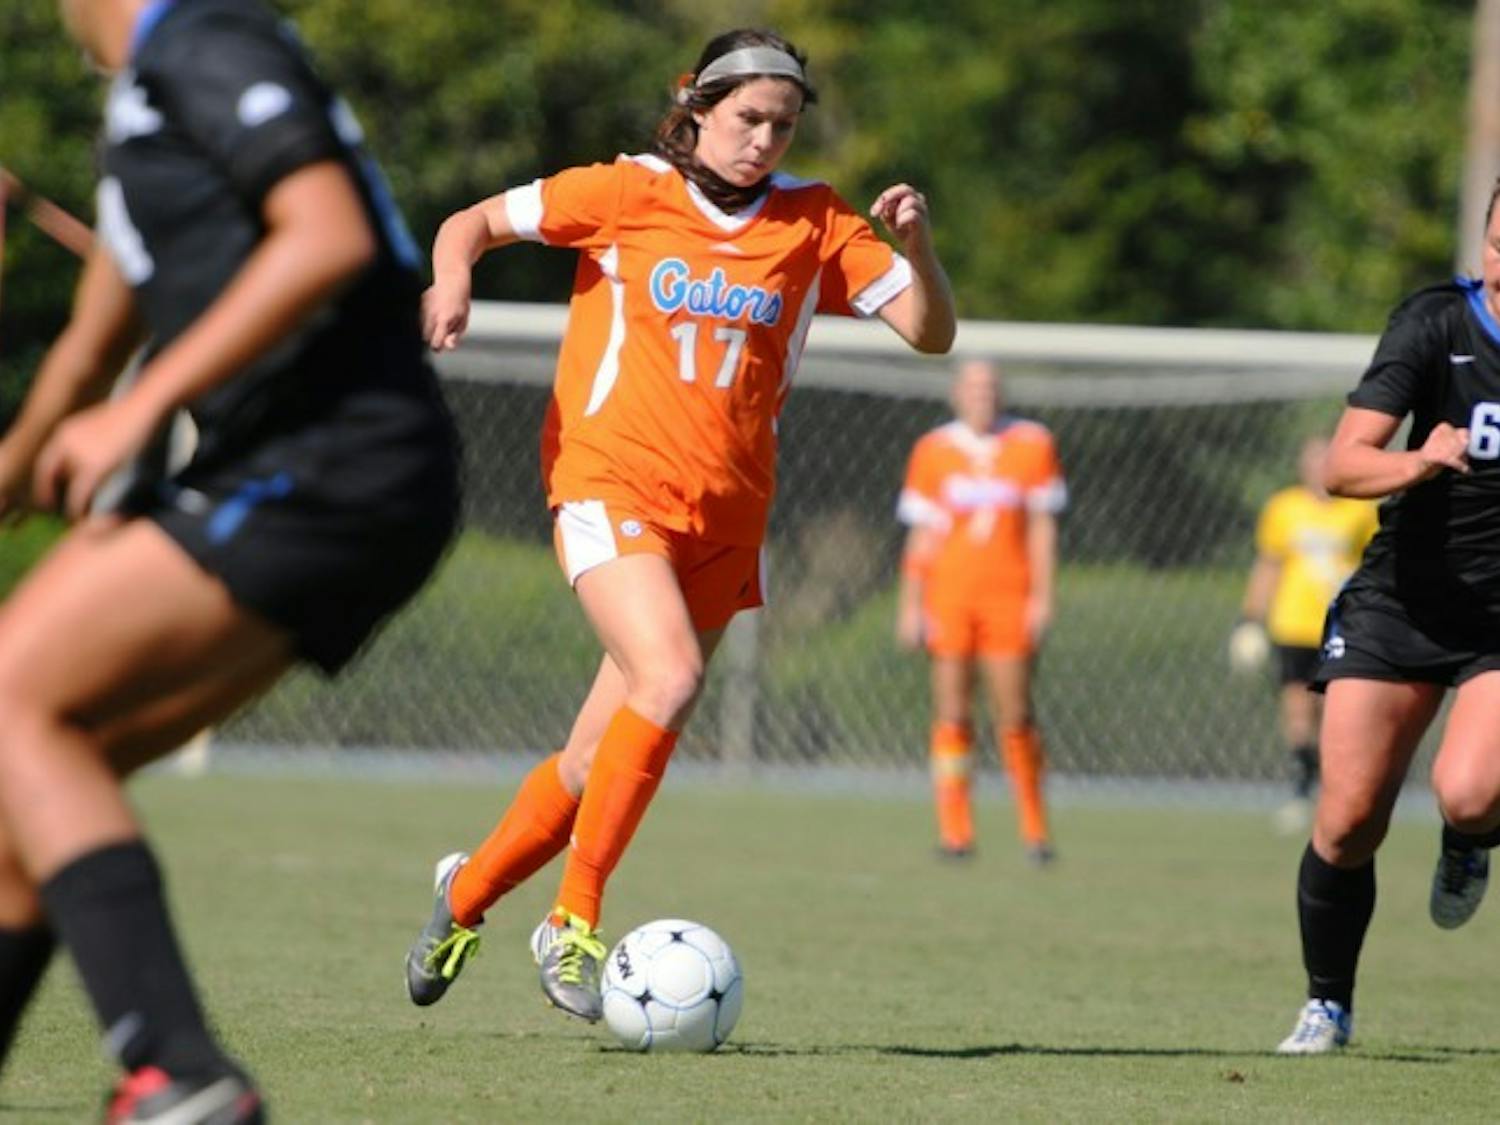 Forward Erika Tymrak pushes the tempo against Kentucky in a game last season. Tymrak broke Florida's scoreless drought during the weekend with a goal in the 51st minute against Vanderbilt.